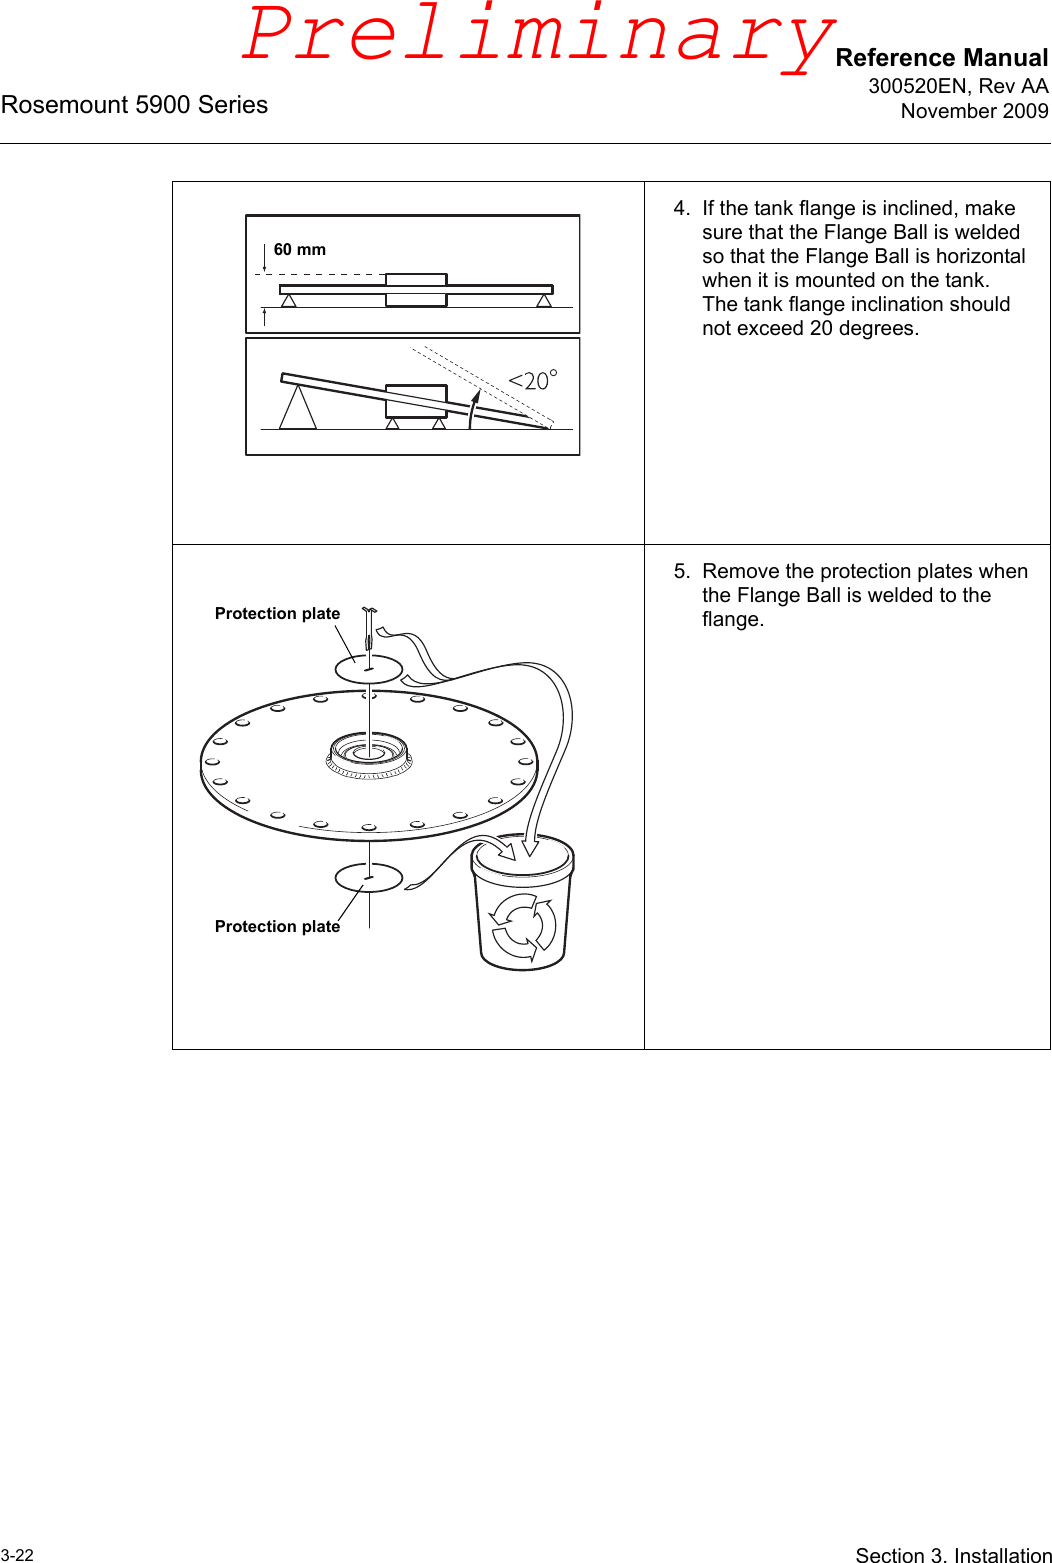 Reference Manual300520EN, Rev AANovember 2009Rosemount 5900 Series3-22 Section 3. Installation4. If the tank flange is inclined, make sure that the Flange Ball is welded so that the Flange Ball is horizontal when it is mounted on the tank. The tank flange inclination should not exceed 20 degrees.5. Remove the protection plates when the Flange Ball is welded to the flange.60 mmProtection plateProtection platePreliminary